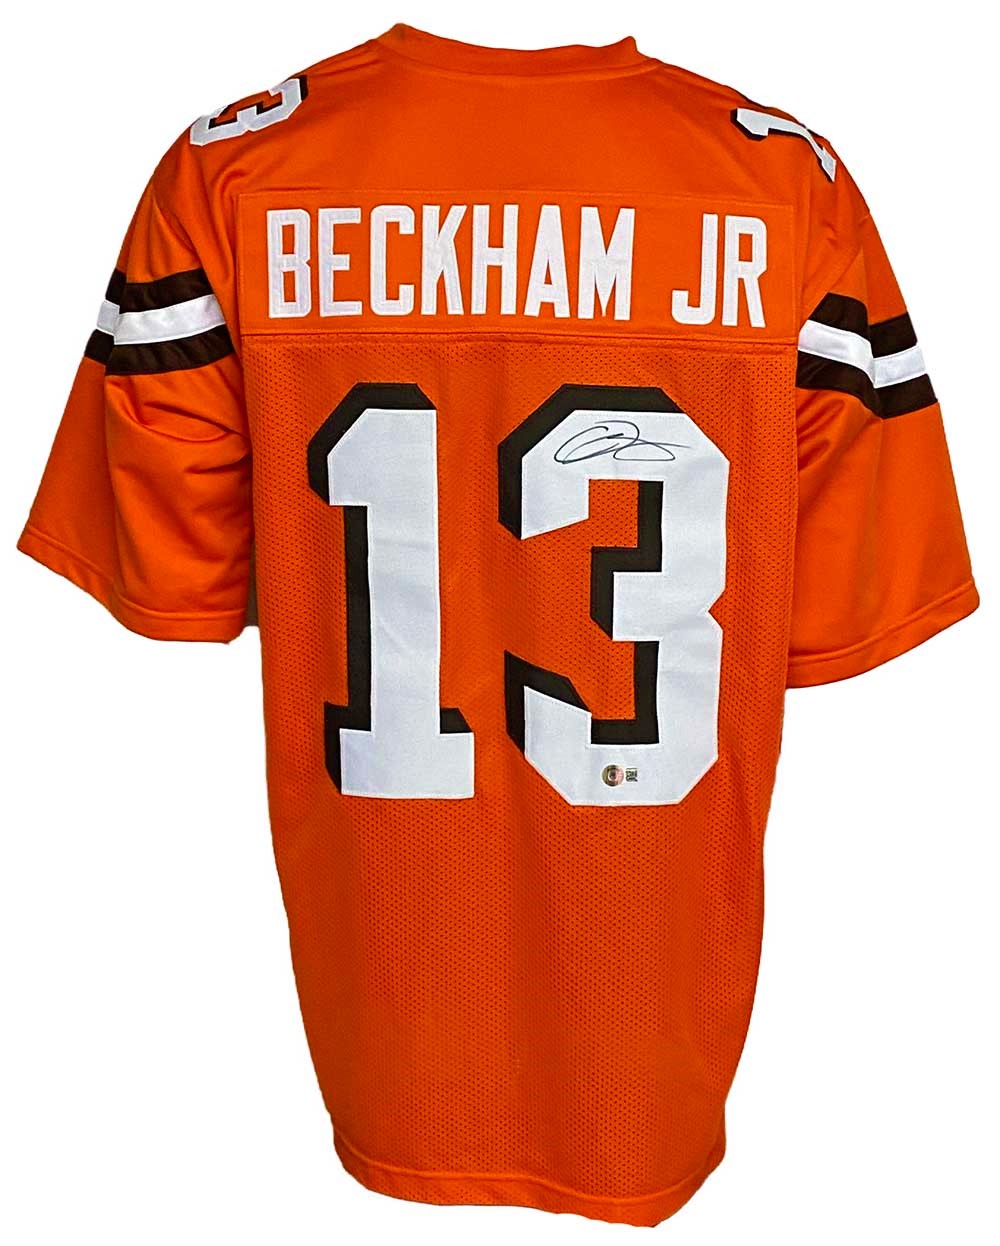 Cleveland Browns Odell Beckham Jr Autographed Pro Style Orange Jersey BAS  Authenticated - Tennzone Sports Memorabilia